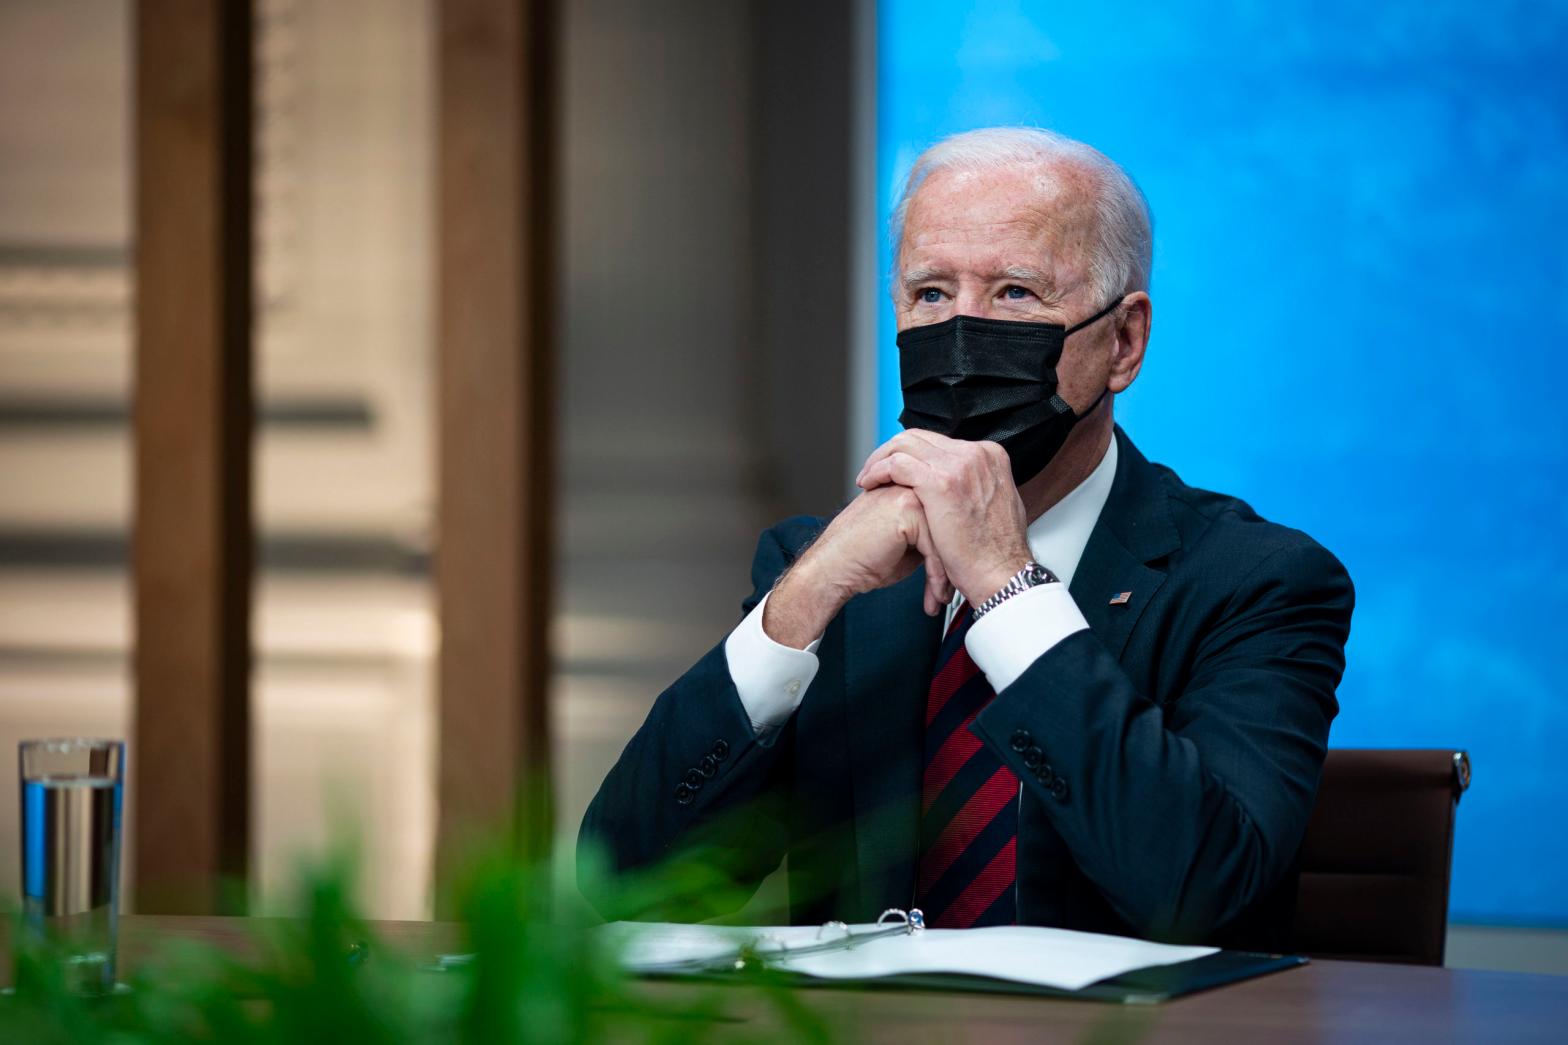 President Joe Biden listens during a virtual Leaders Summit on Climate with 40 world leaders in the East Room of the White House April 22, 2021 in Washington, DC. President Biden pledged to cut greenhouse gas emissions by half by 2030.  (Photo: Al Drago-Pool, Getty Images)